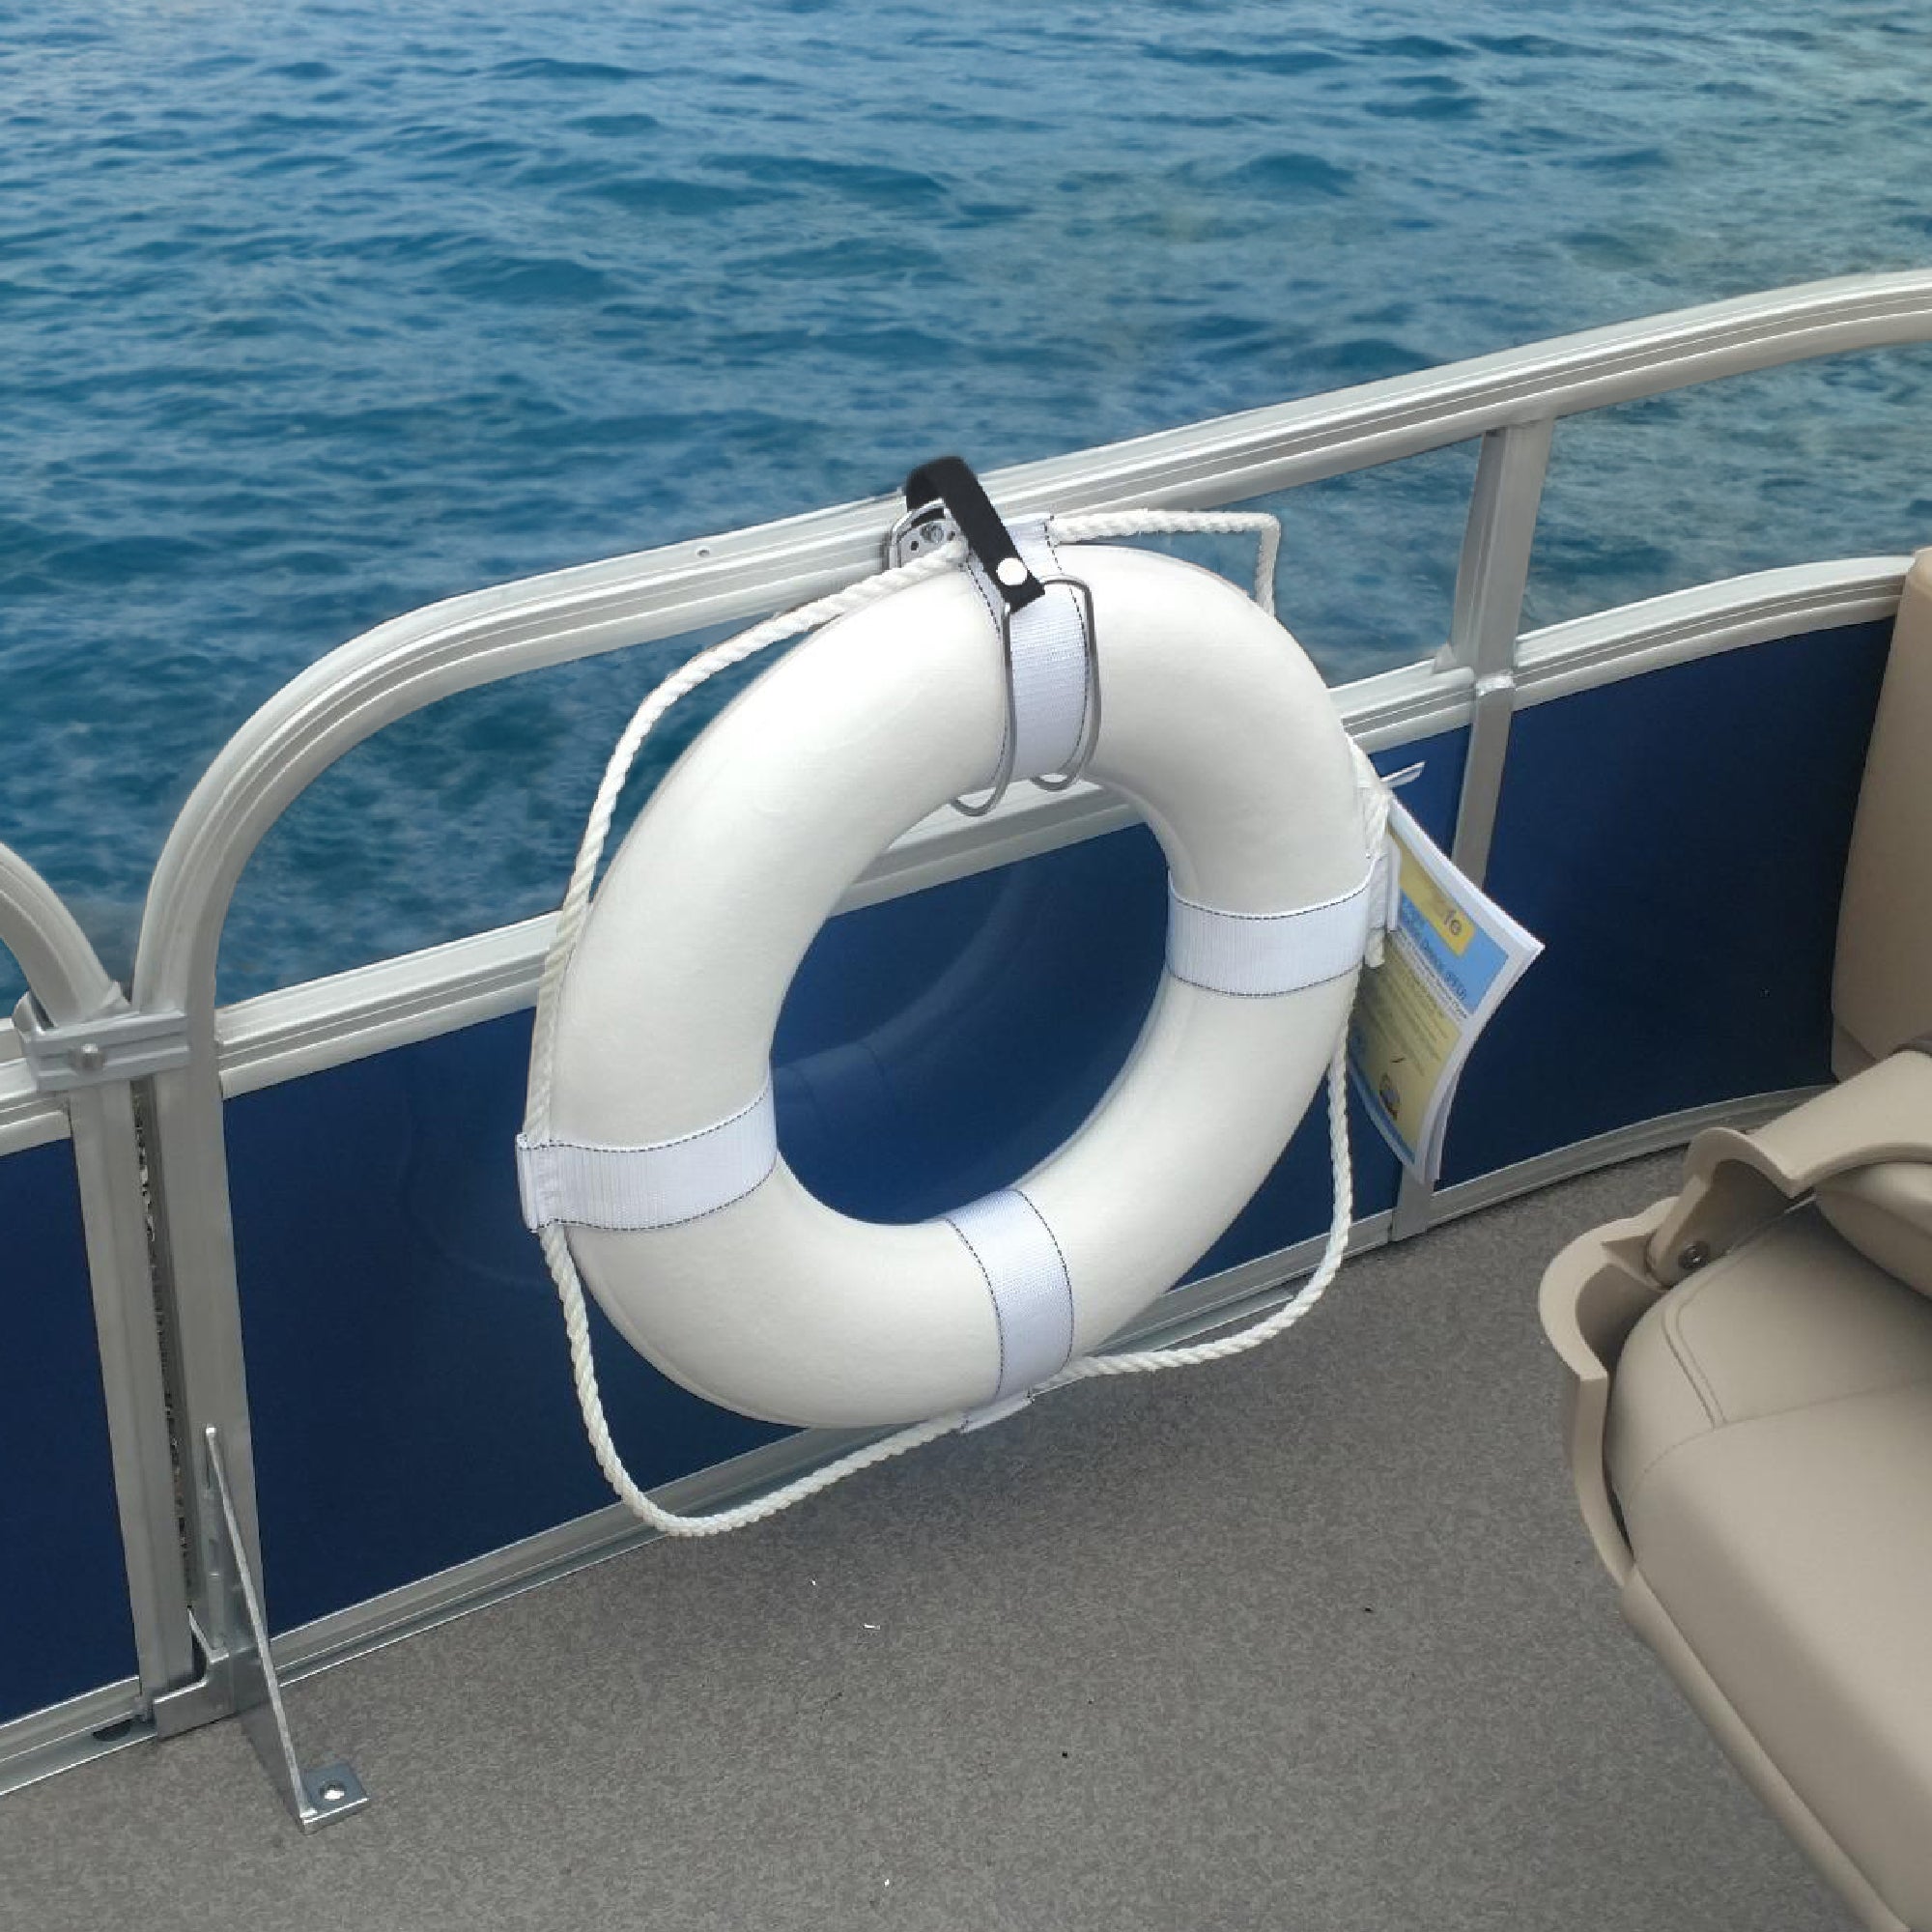 Ring Buoy Mounting Bracket Holder with Strap, Stainless Steel, Rail/Flat Mount - FO555